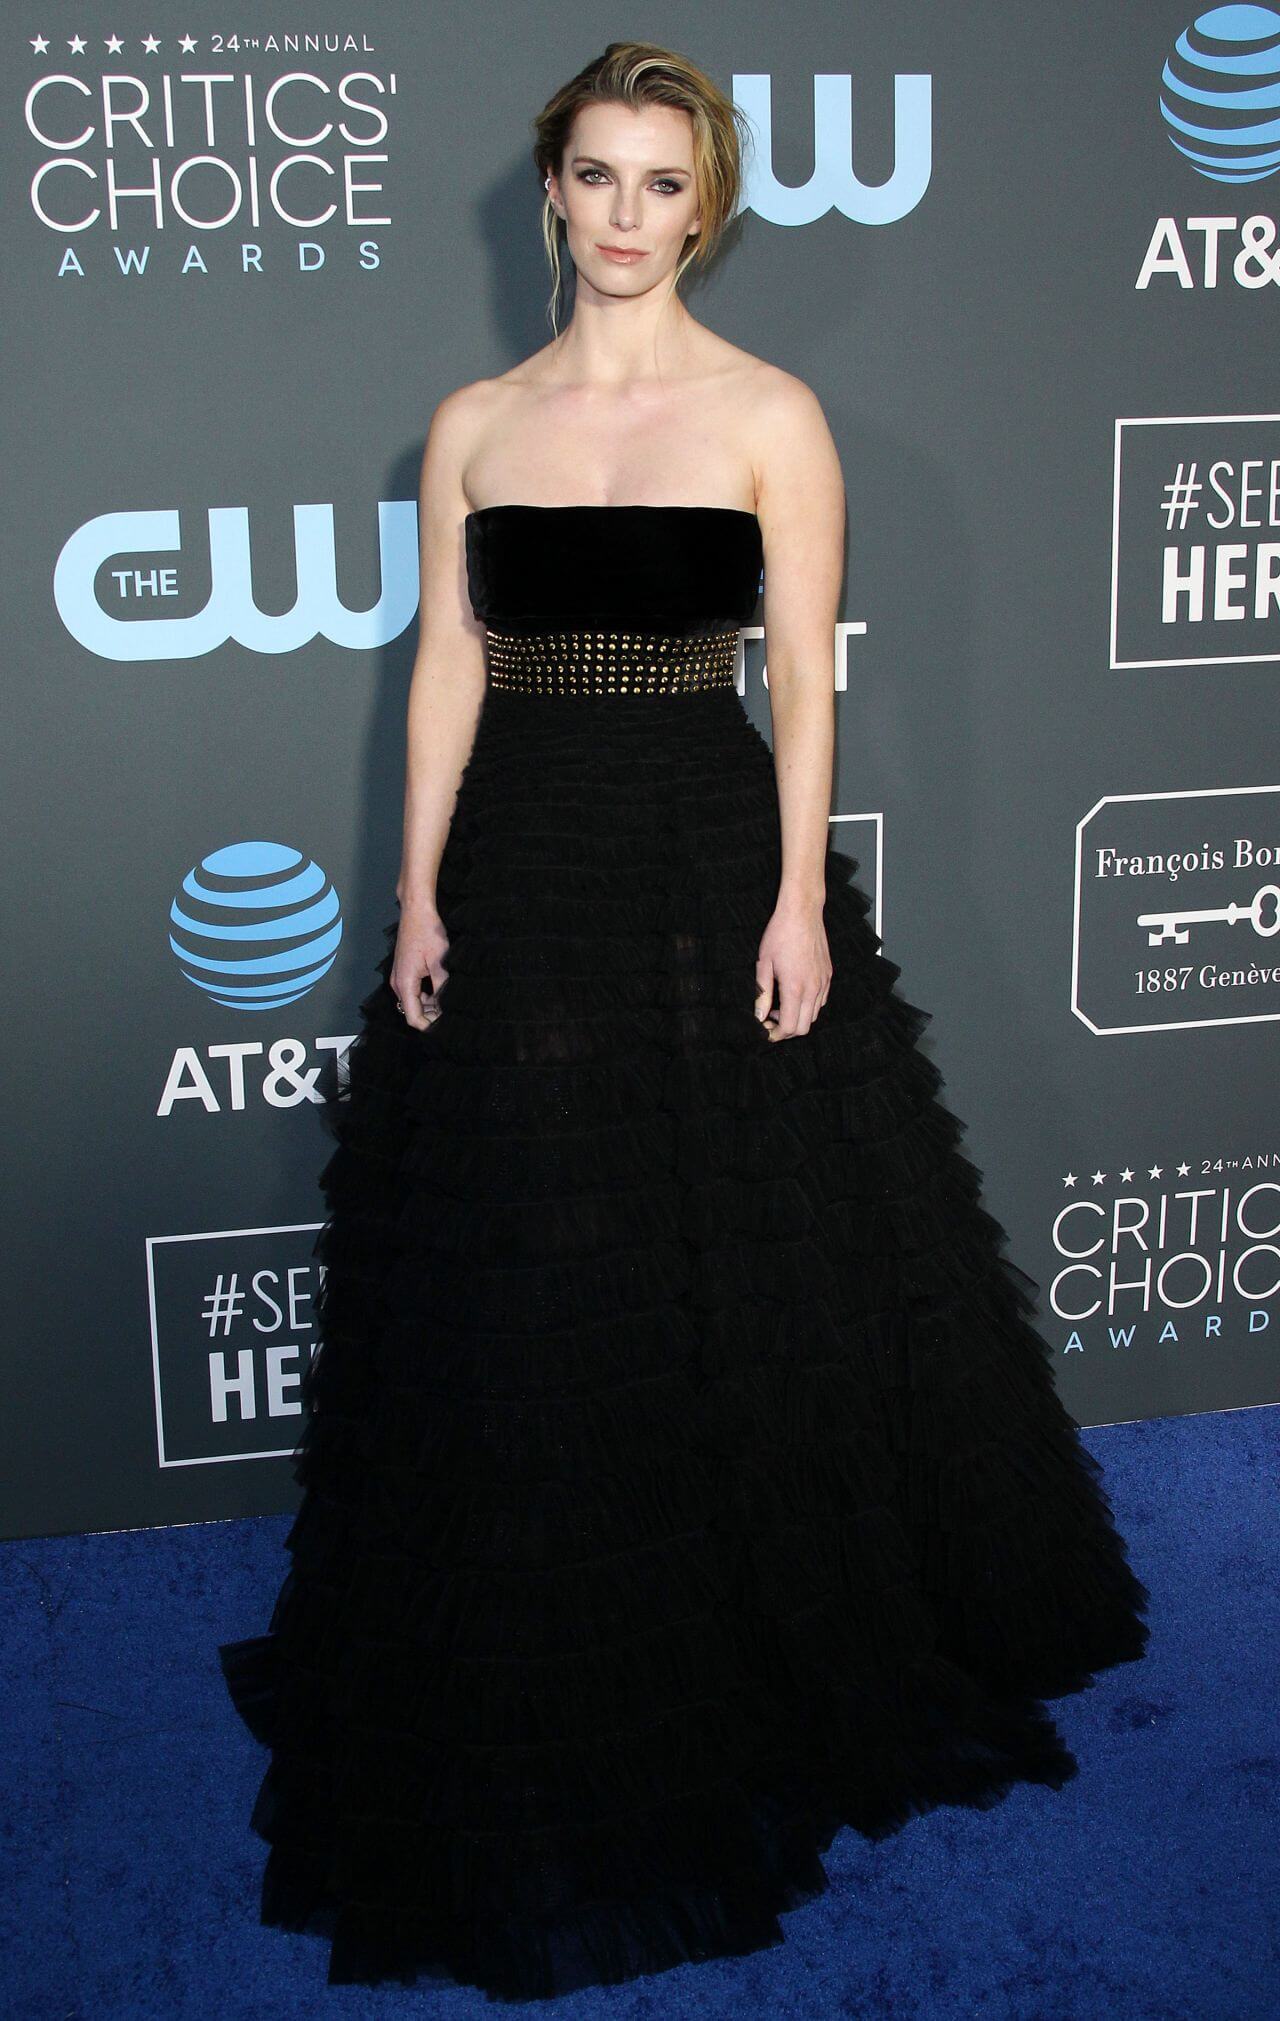 Betty Gilpin Gorgeous In Black Strapless Long Fairytale Gown With Golden Waist Belt At Critics’ Choice Awards